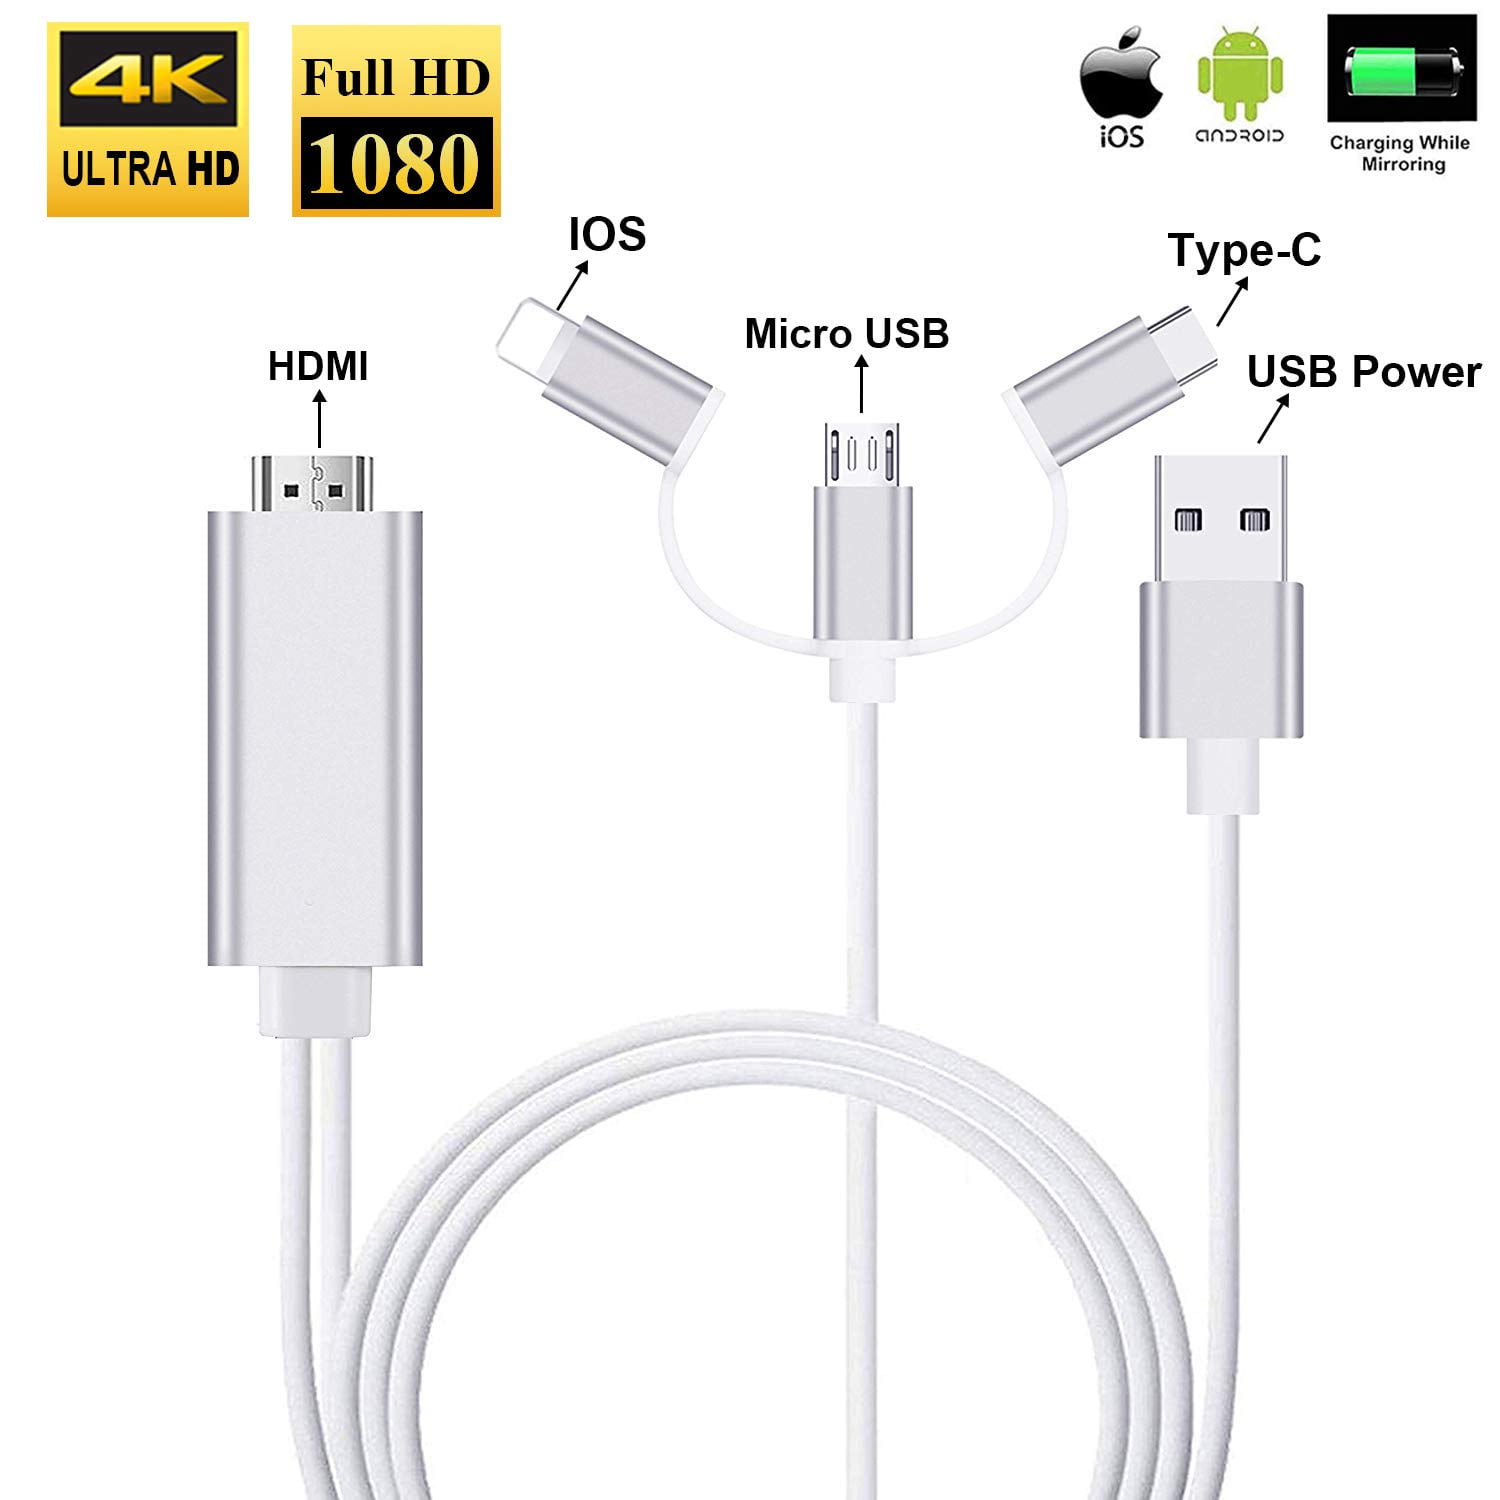 iPad 2/3/4 to Hdtv Screen Hi-Speed 1080P Audio Video Ethernet Cable for iPhone4 